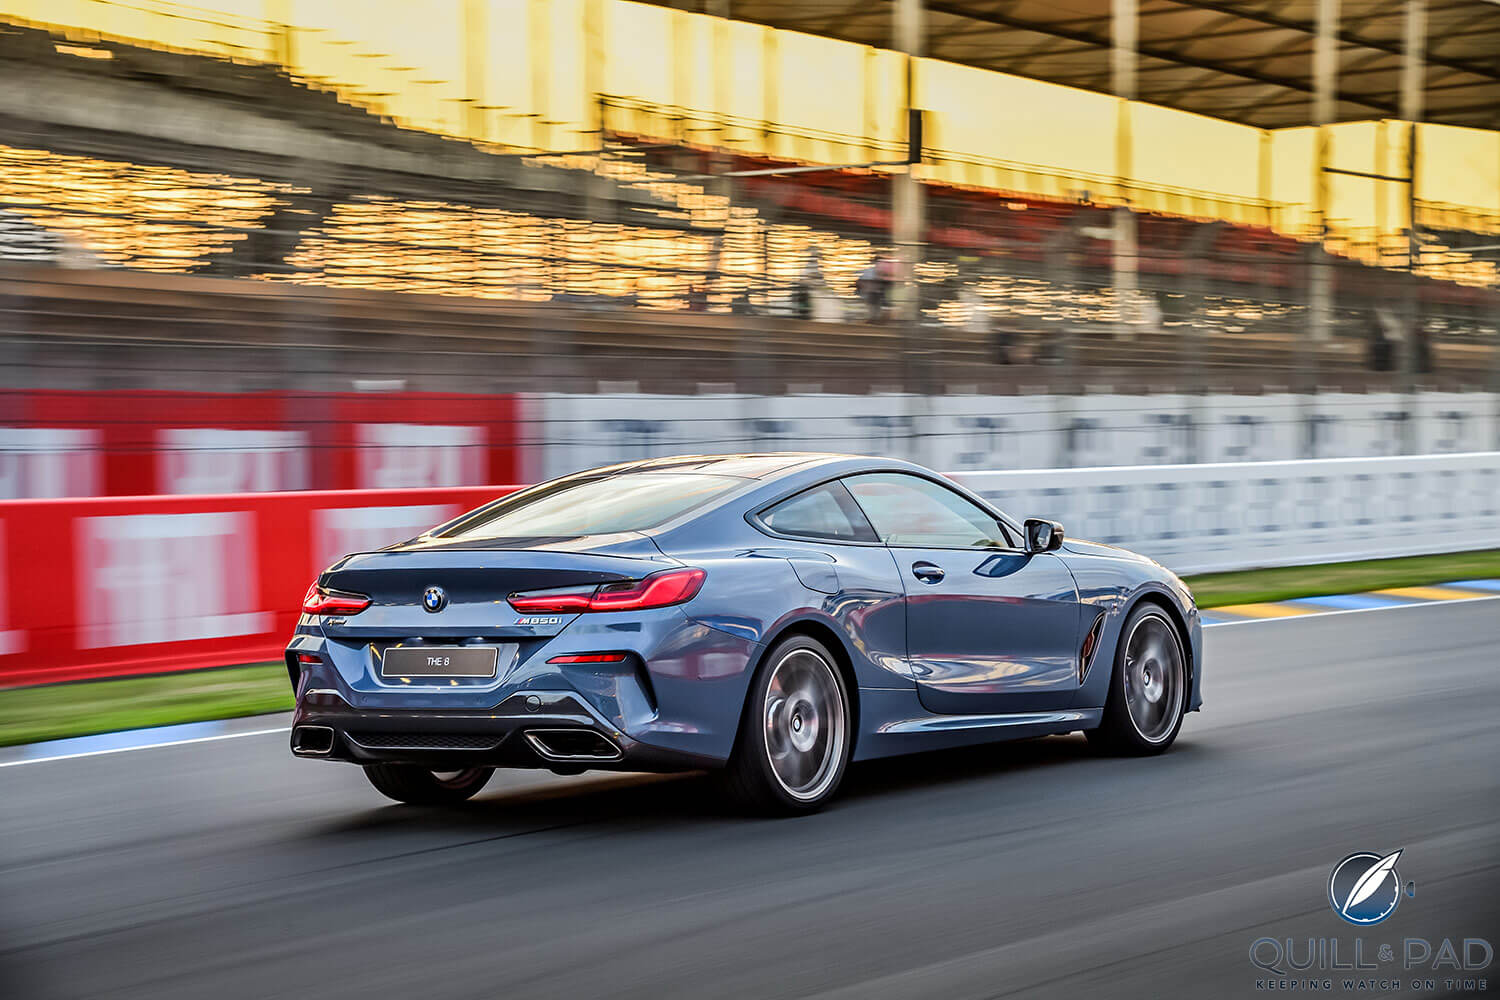 BMW M850i xDrive Coupe from the back